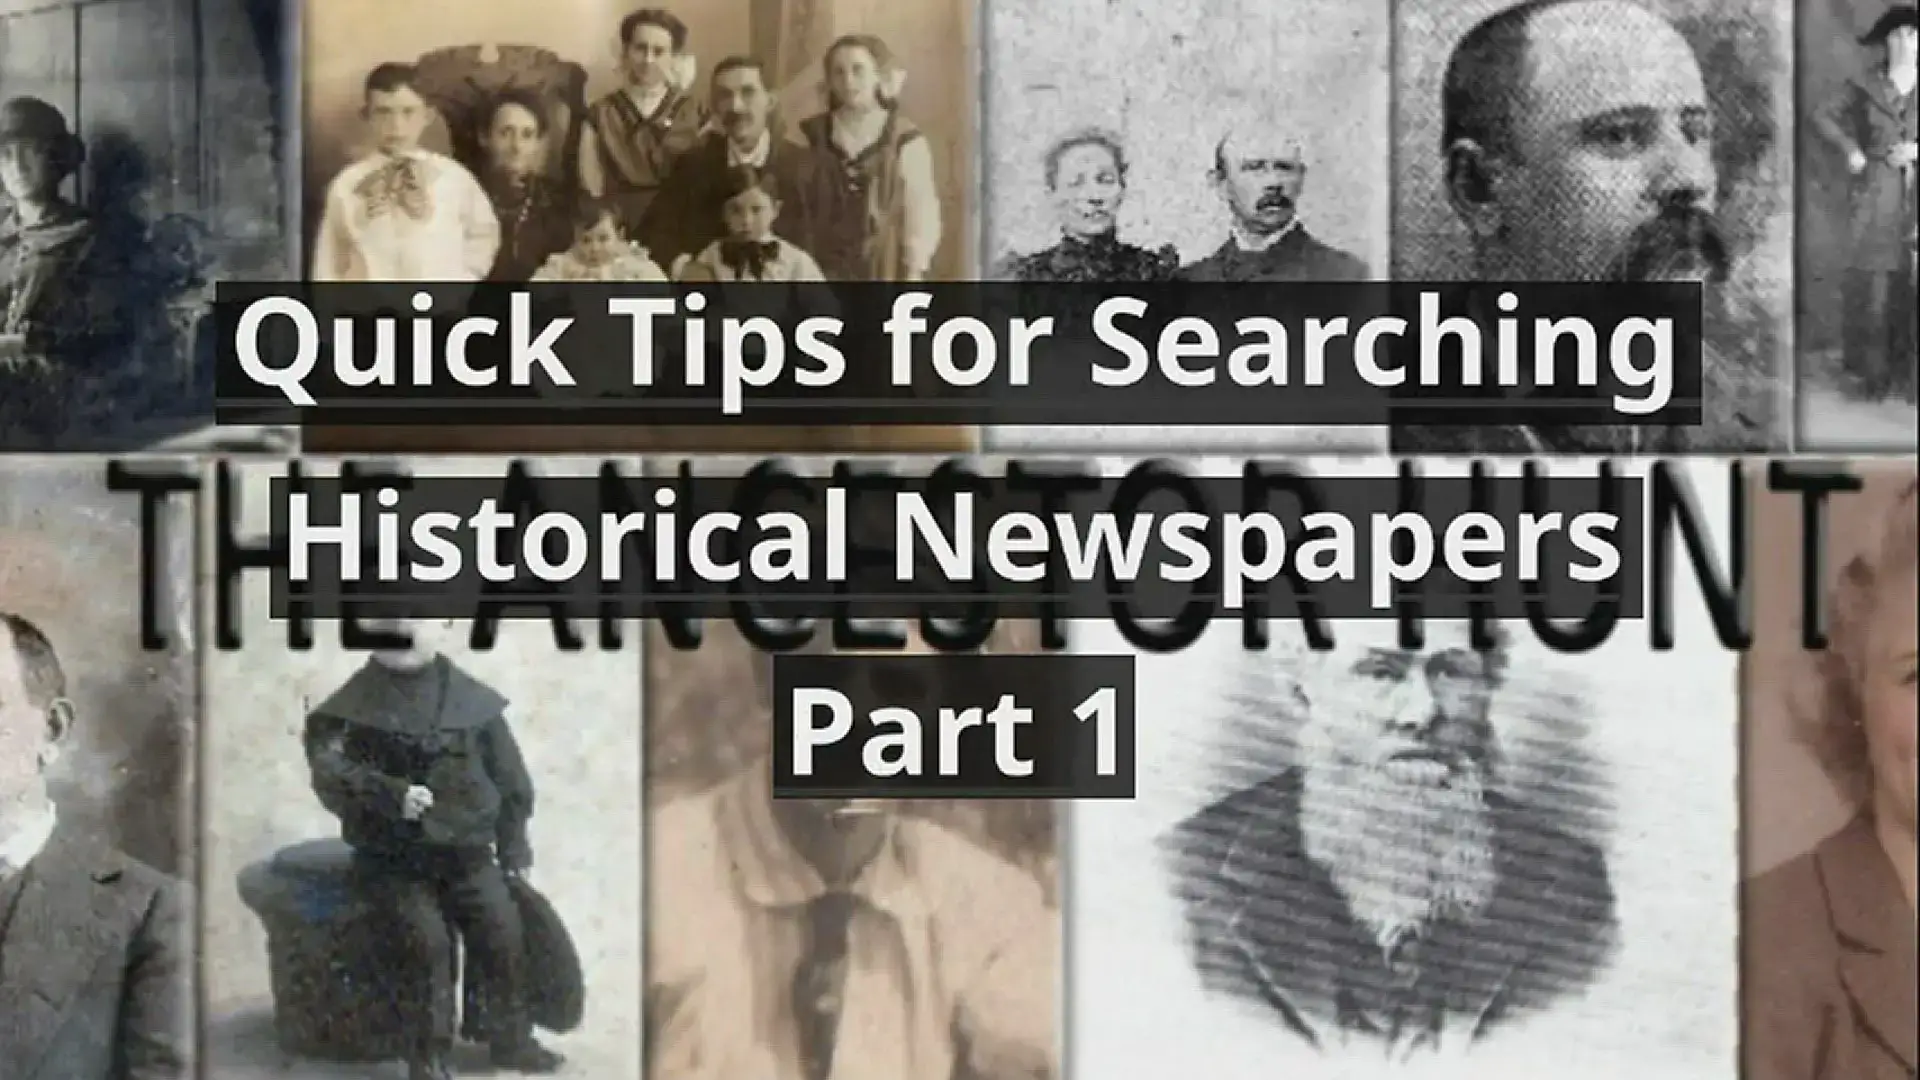 'Video thumbnail for Quick Tips for Searching Historical Newspapers - Part 1'